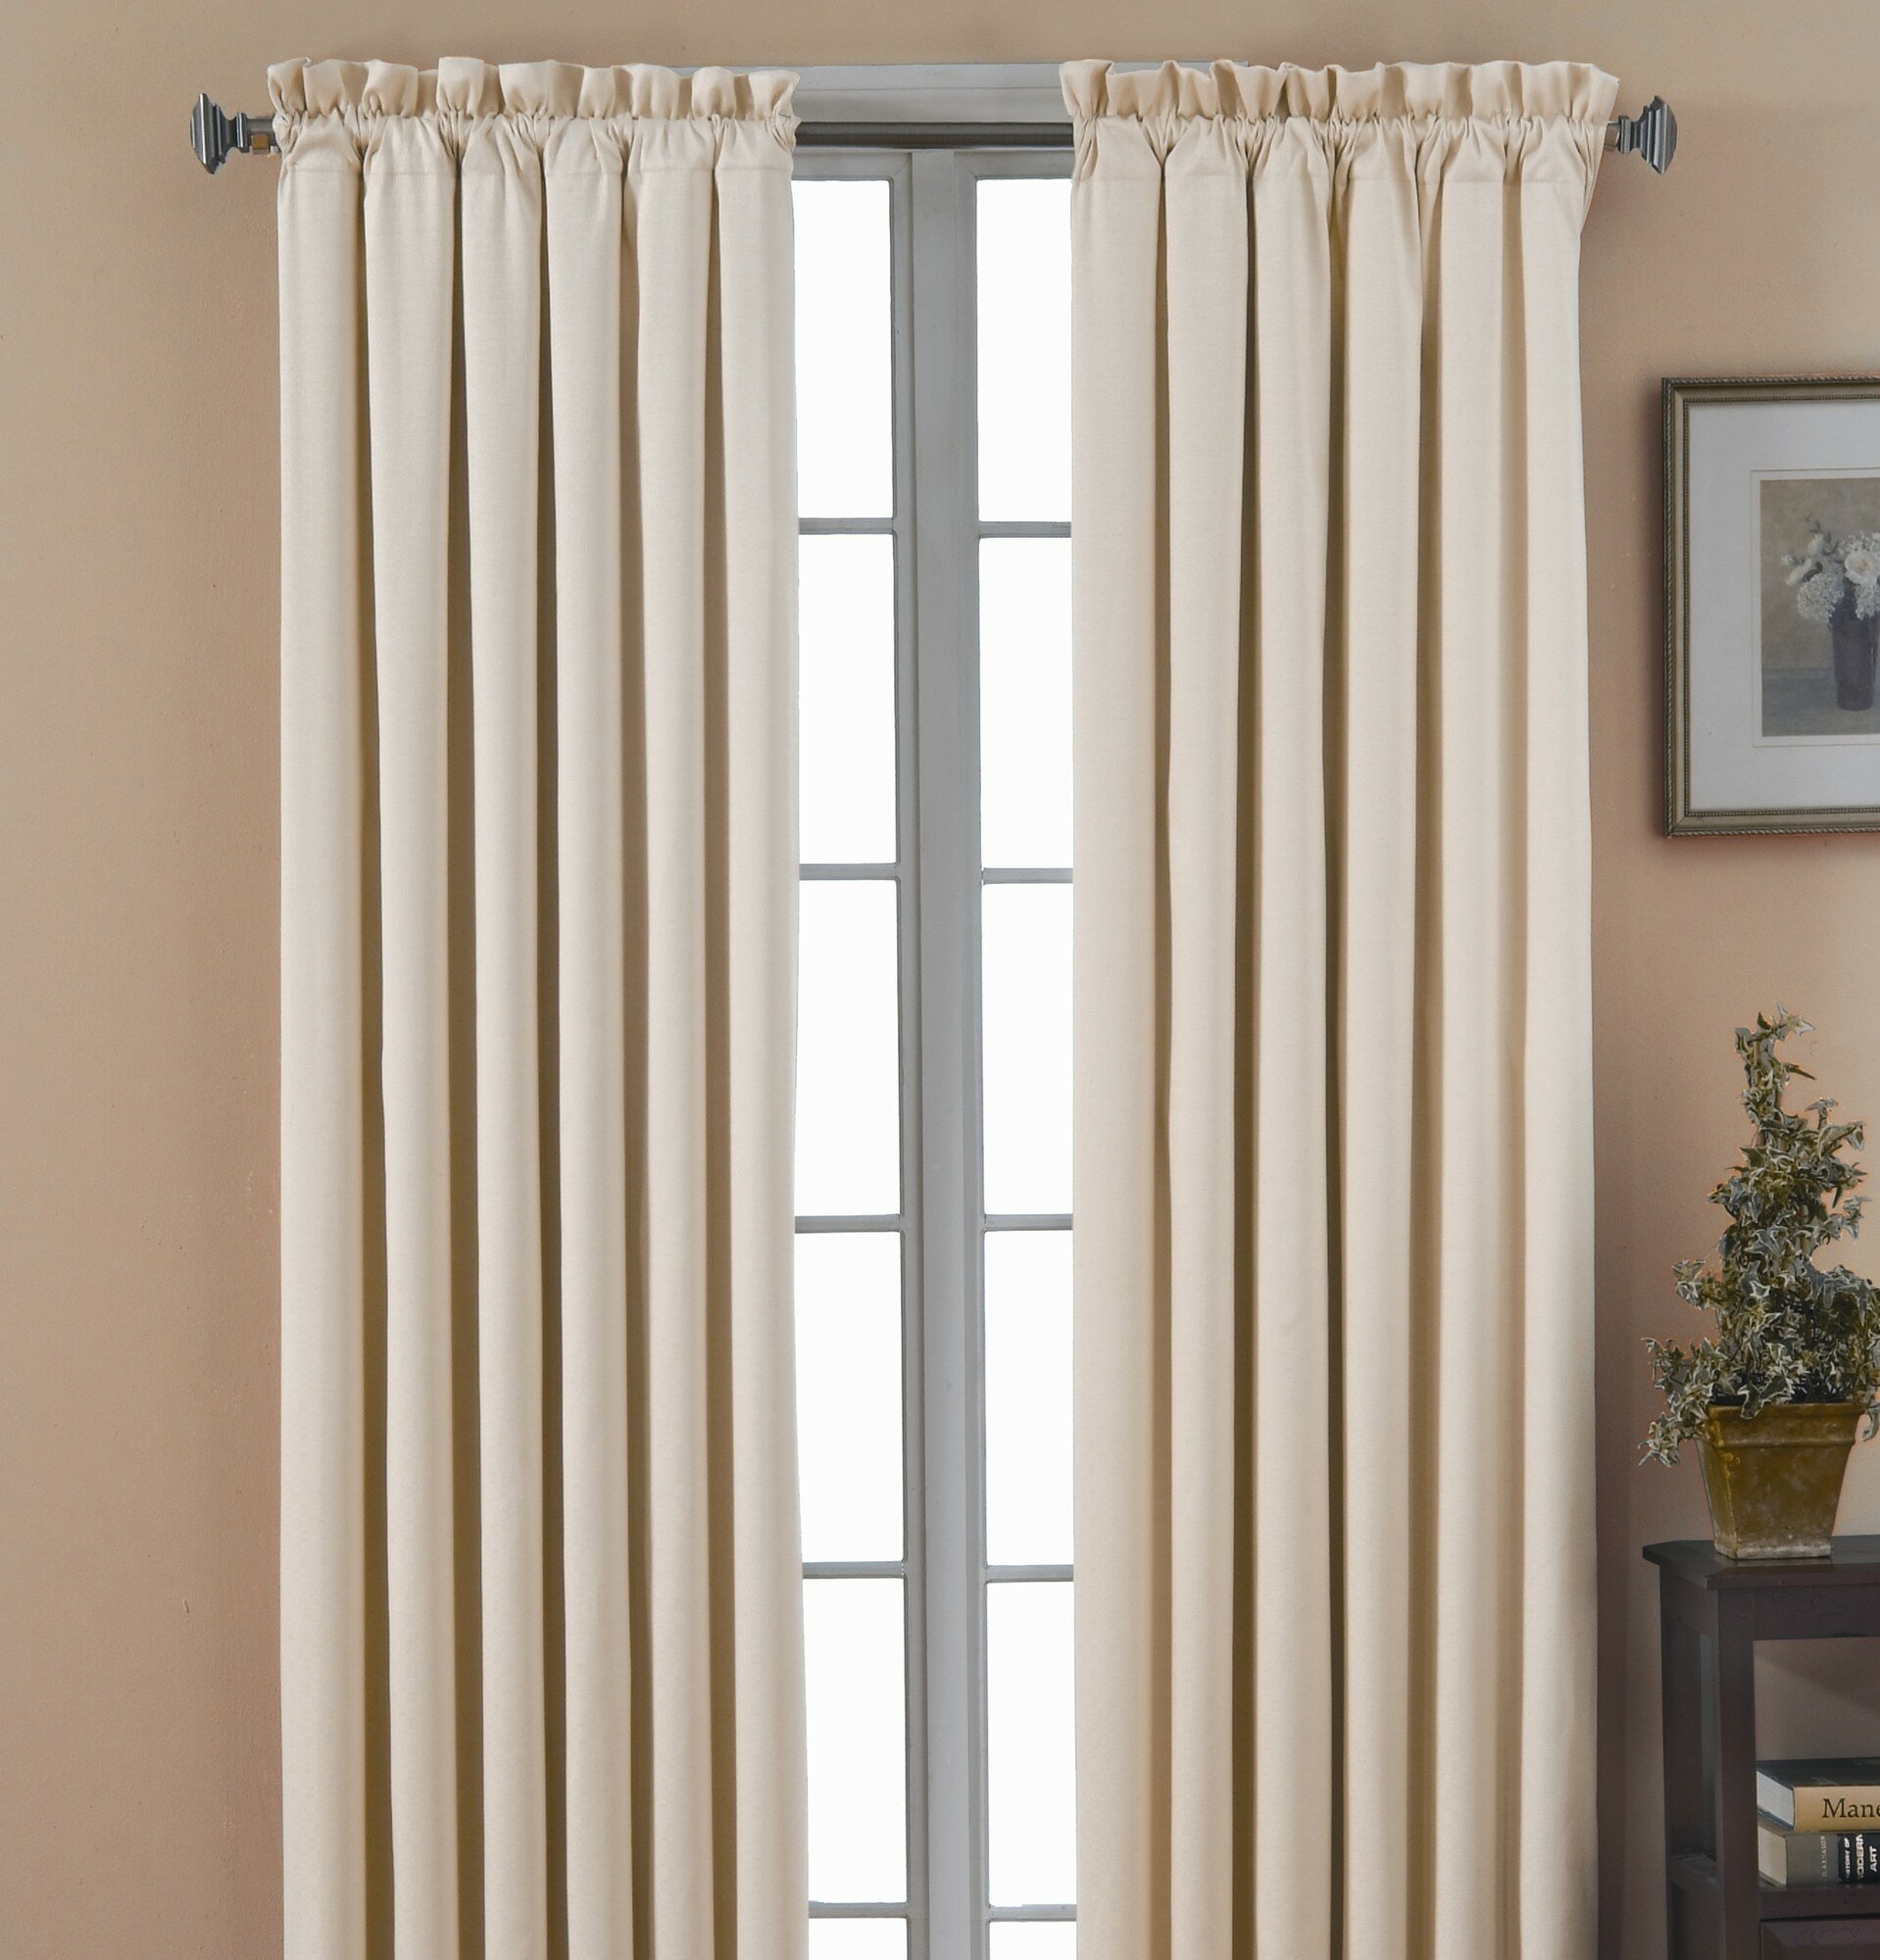 Cheap Blackout Curtains | Curtains Thermal Blackout | Opaque Curtains